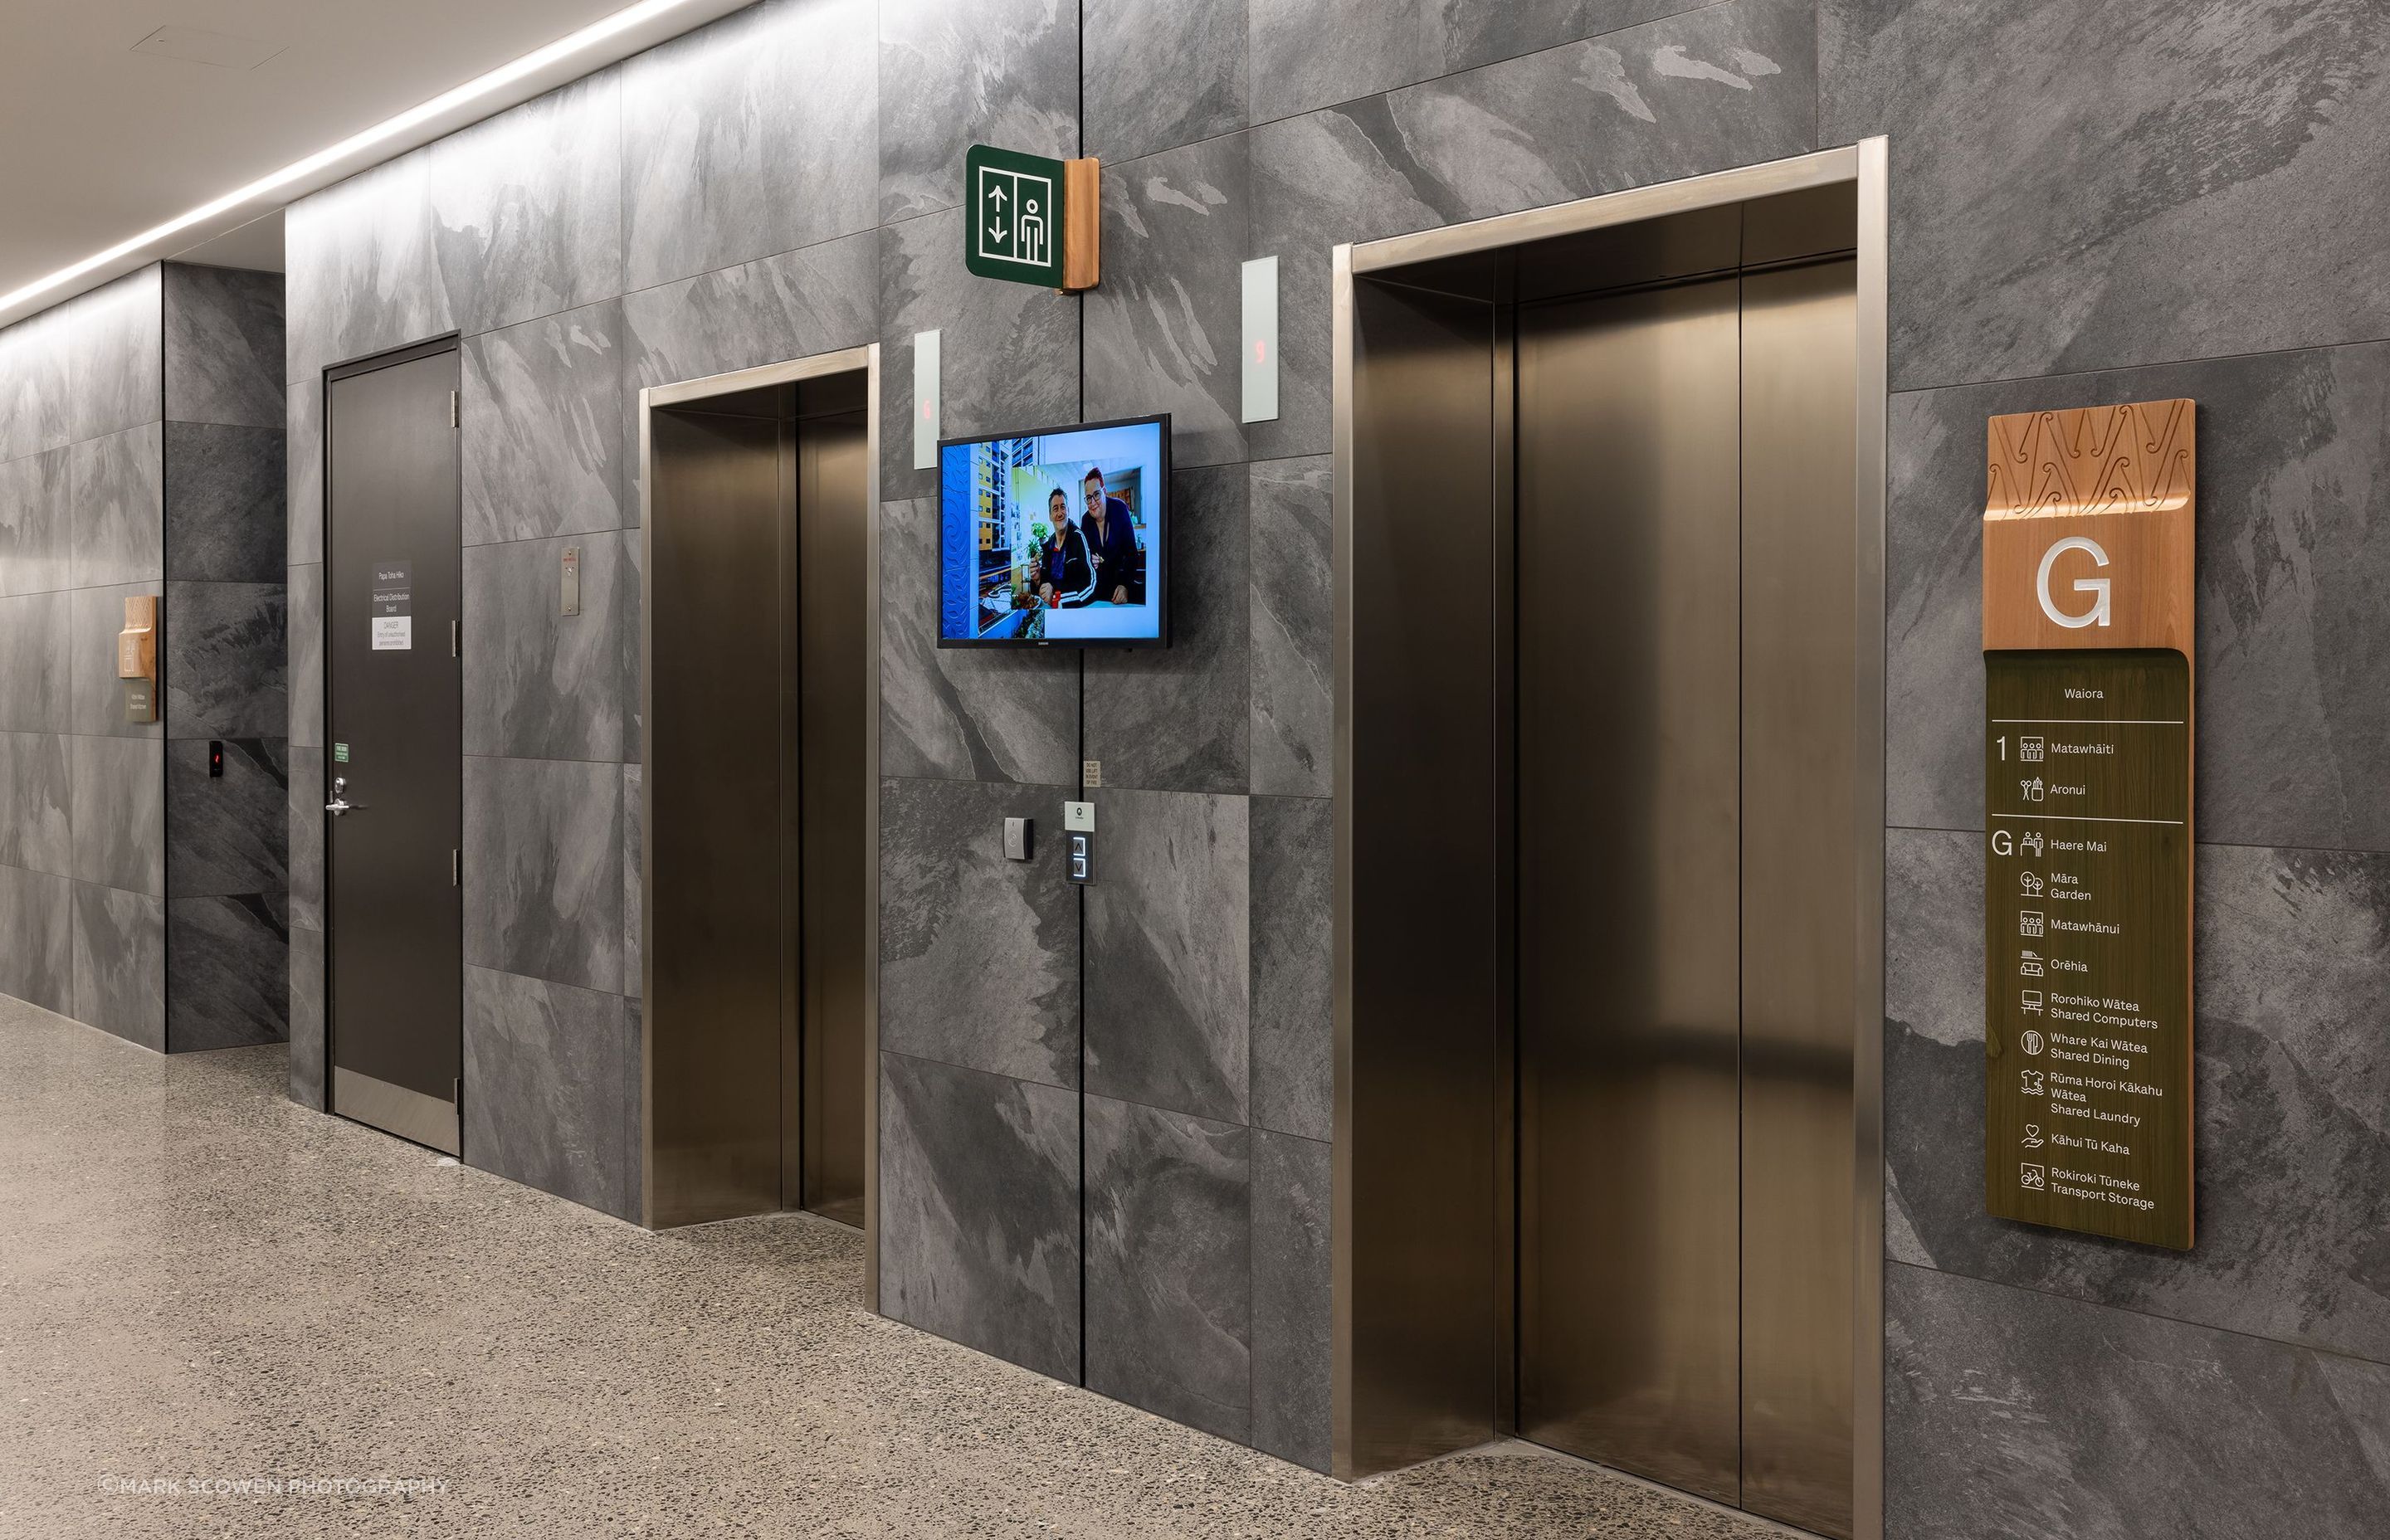 The lift lobbies feature wall tiling which continues through to the ground floor elevator landings.